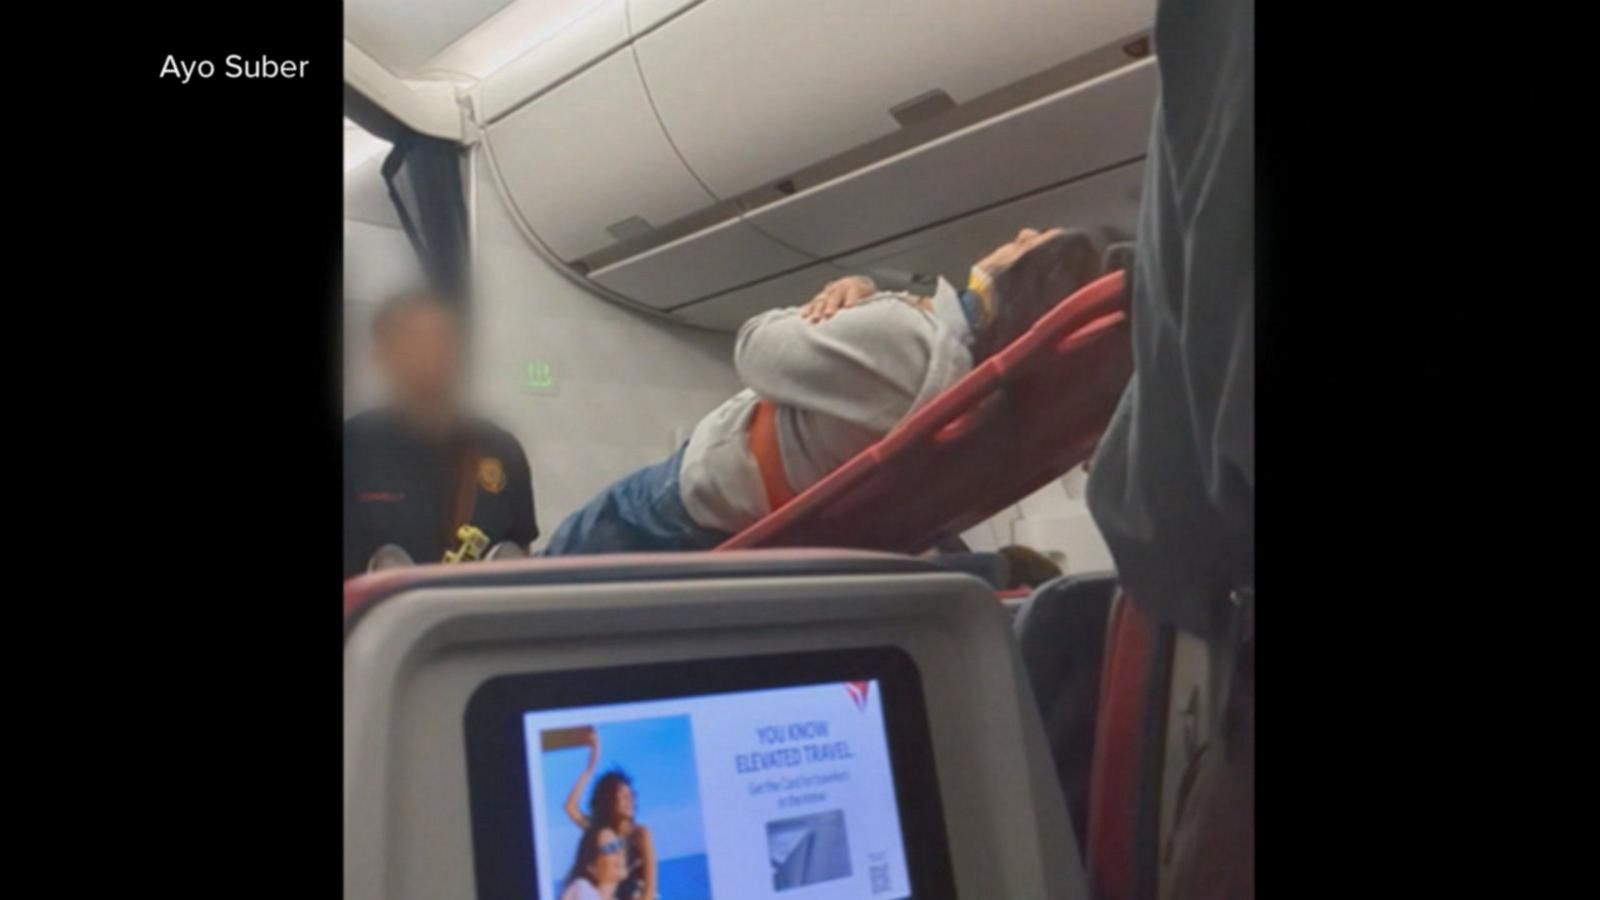 Images Show Aftermath Of Severe Turbulence That Injured Good